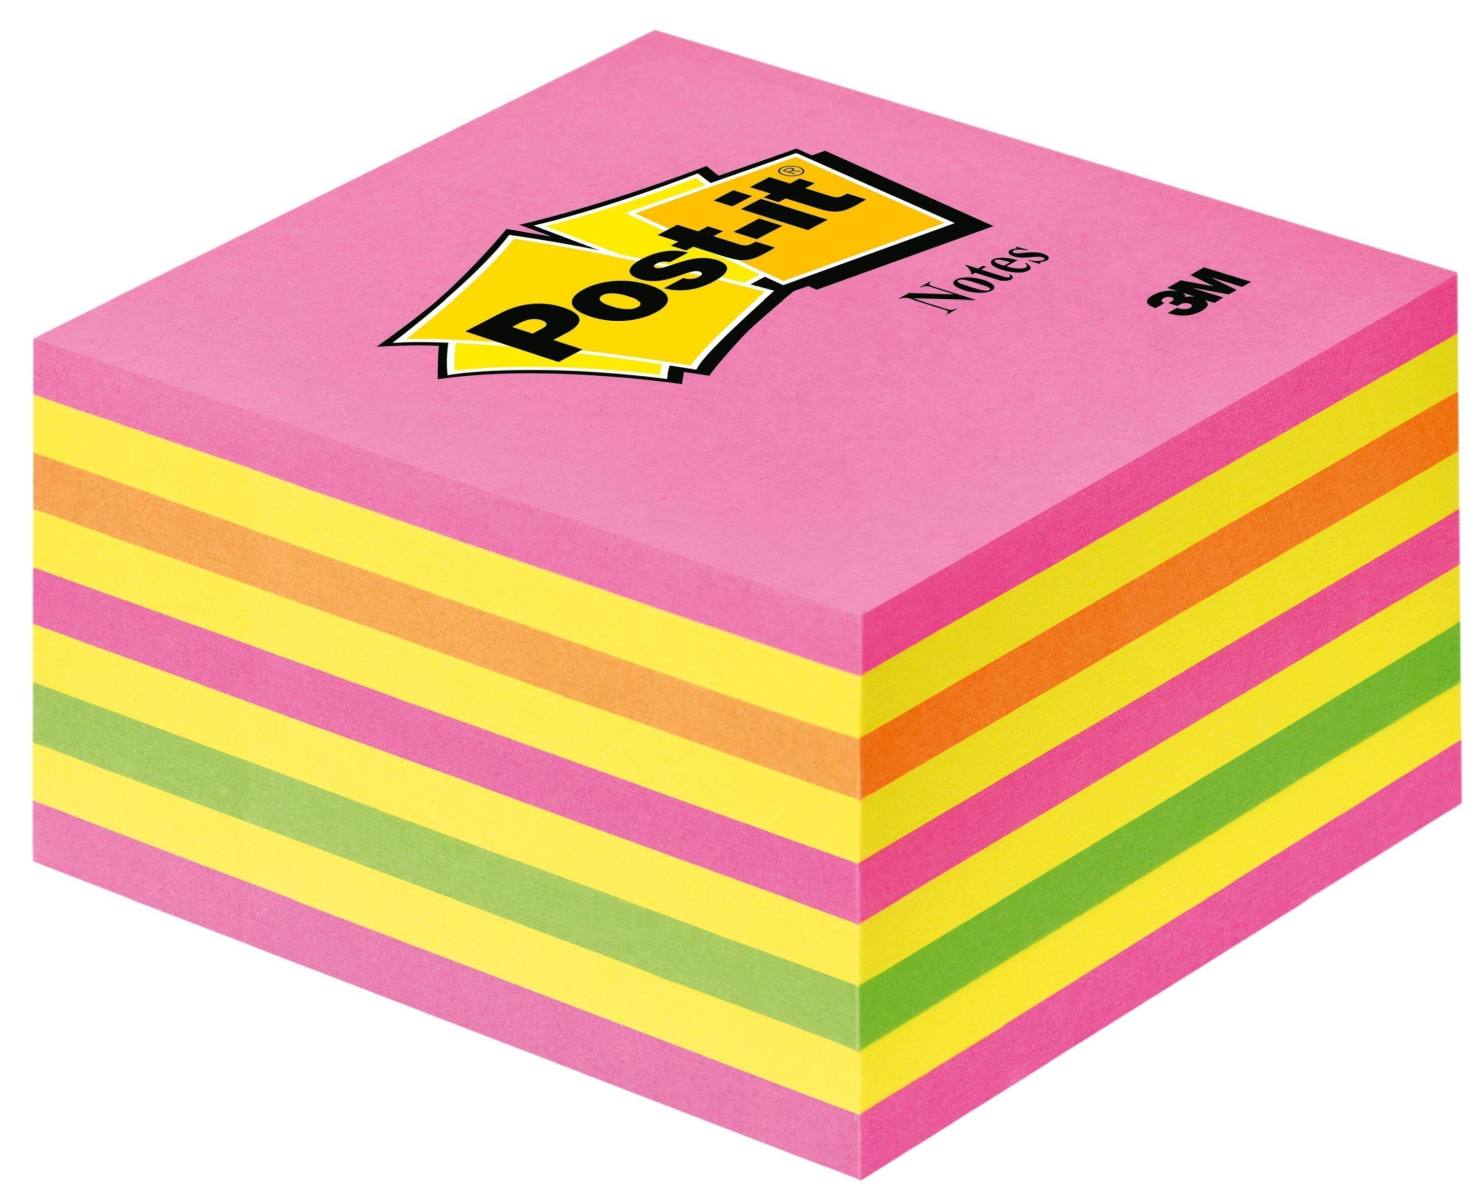 3M Post-it Cube 2028NP, 76 mm x 76 mm, yellow, neon green, neon pink, pink, 1 cube of 450 sheets, pack=12 pieces